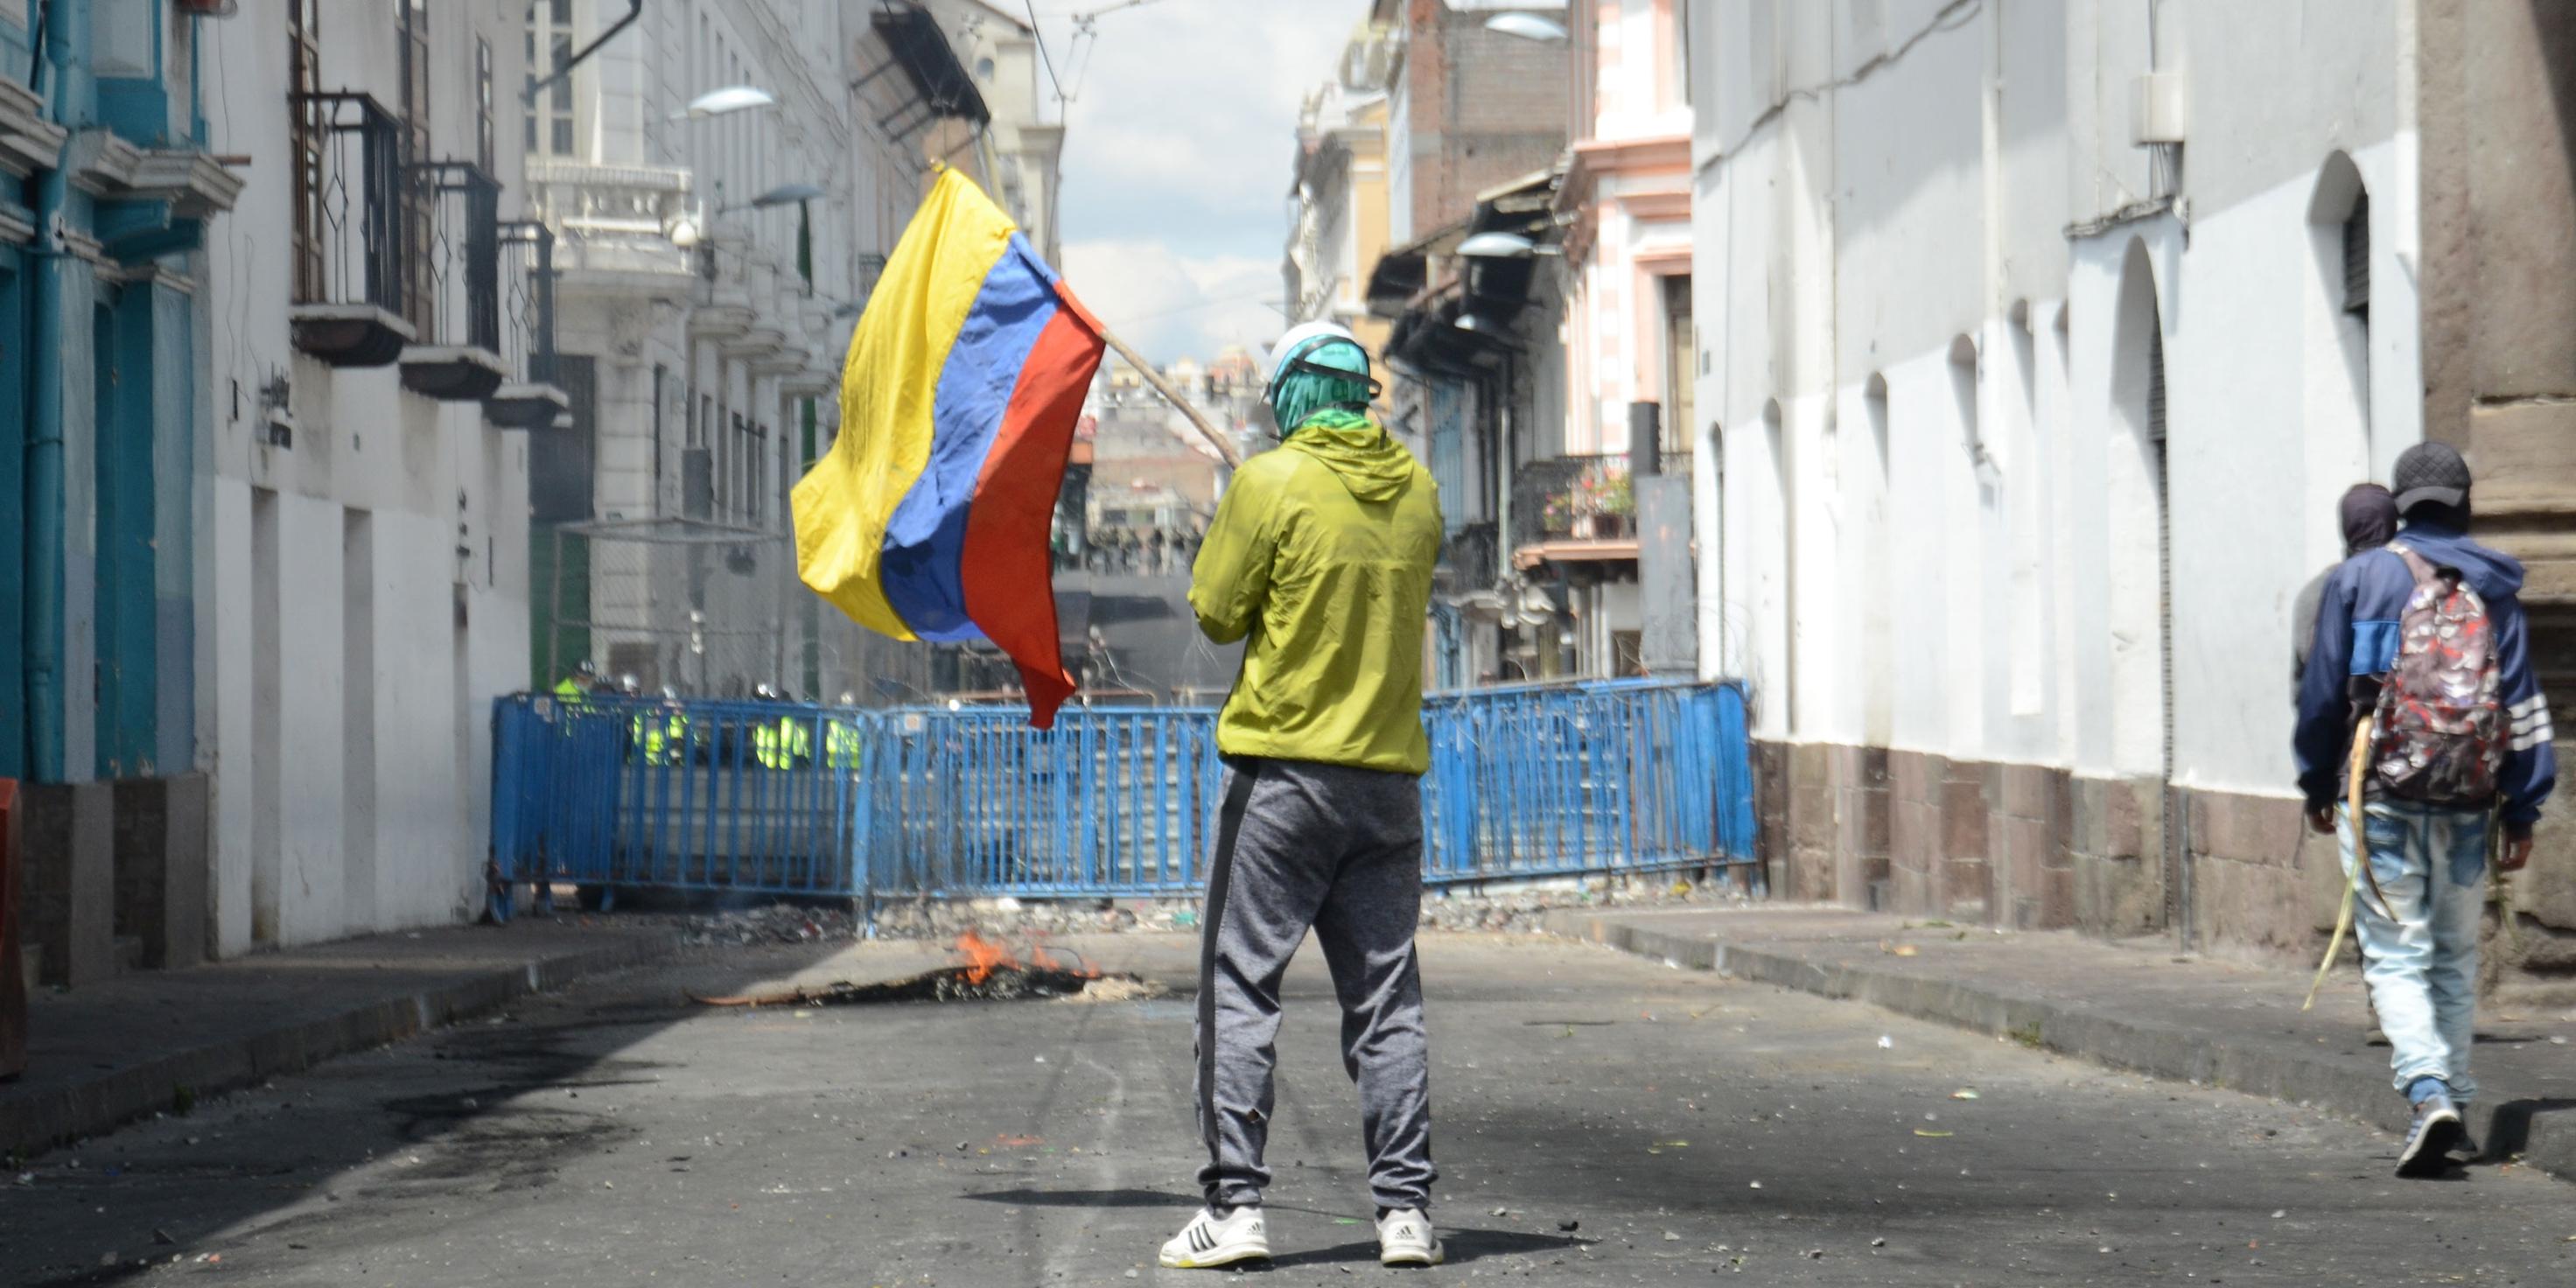 What Are the Dimensions of Ecuador’s Increasing Organized Crime?